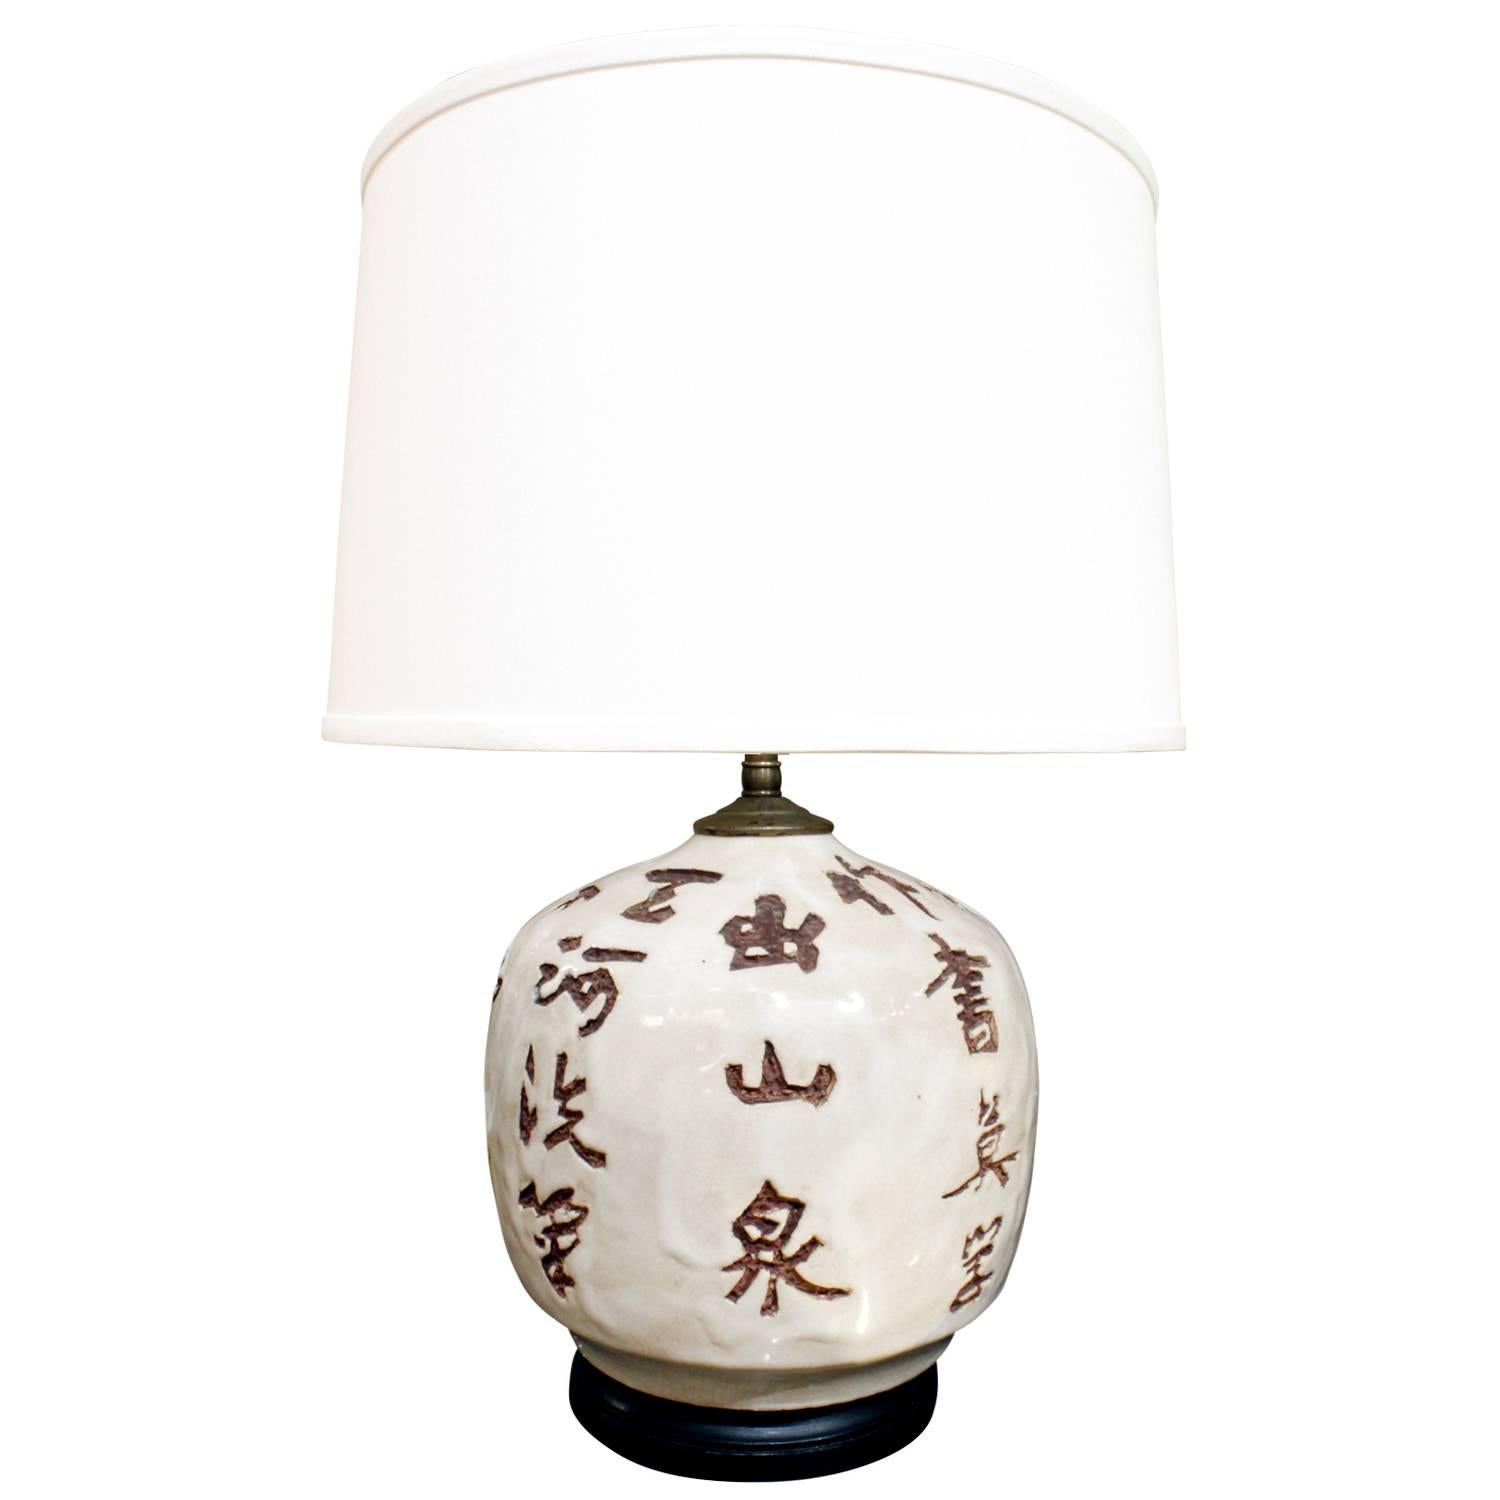 Pair of chic studio ceramic table lamps with Chinese character decoration with wooden bases, American, 1950s. These lamps are beautifully made.

Measures: Shade diameter 14 inches.